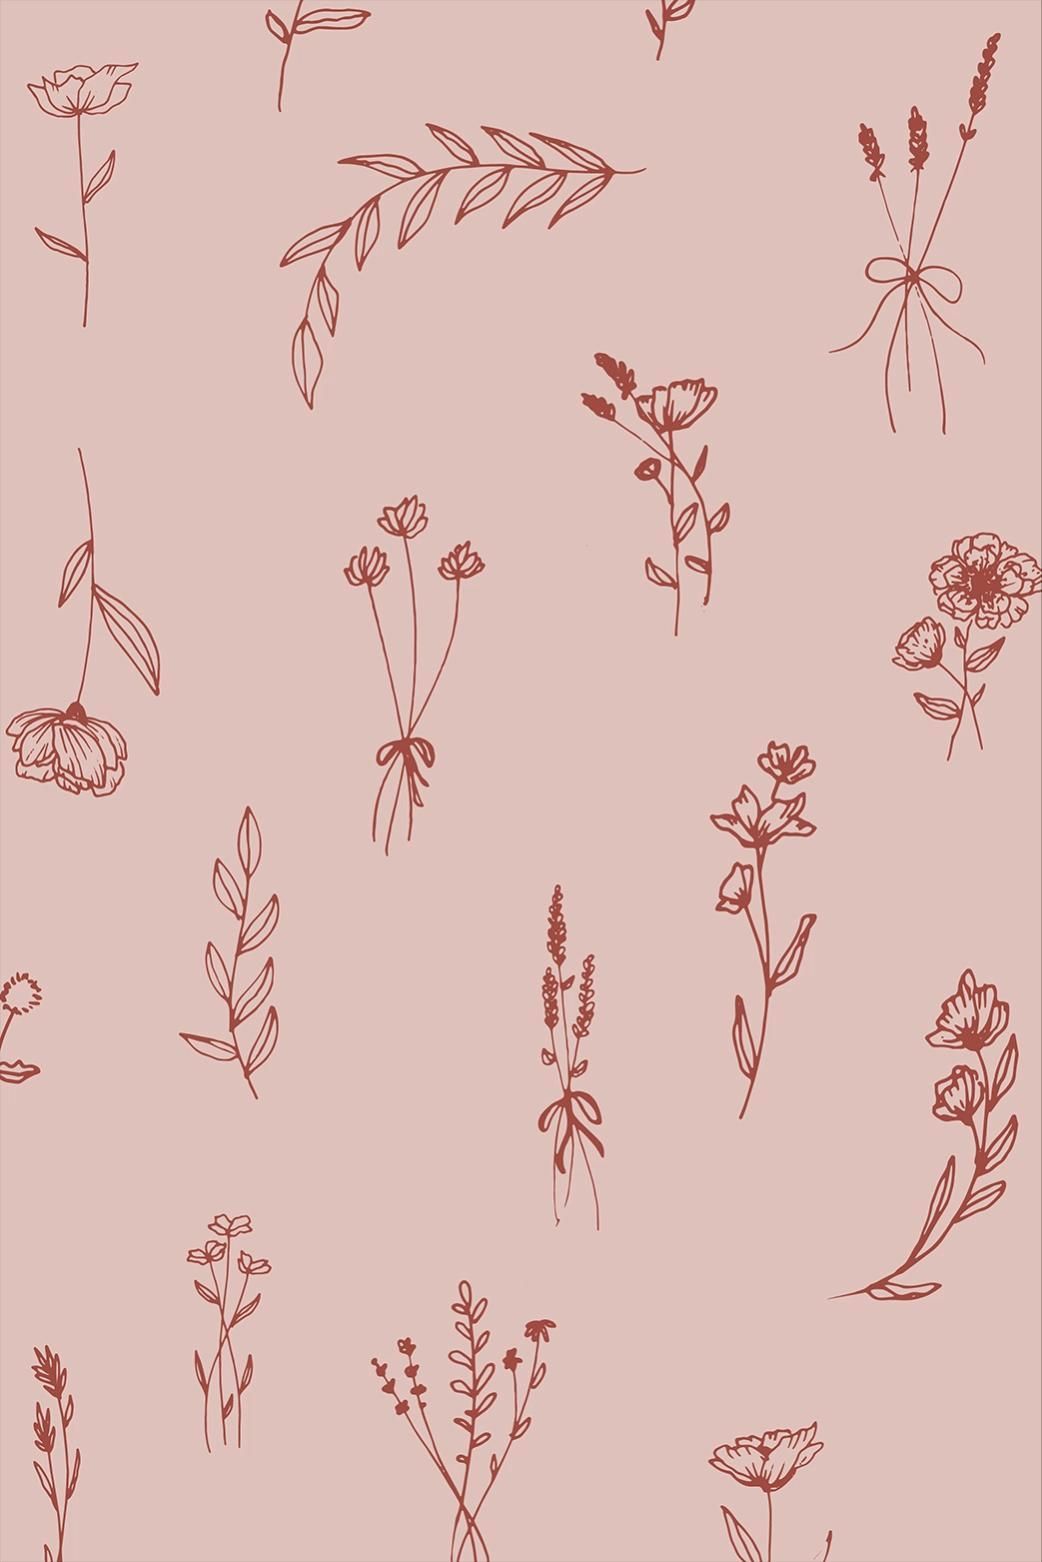 Modern Romantic | Minimal pink & red floral pattern - Modern Romantic | Minimal pink & red floral pattern -   beauty Background drawings